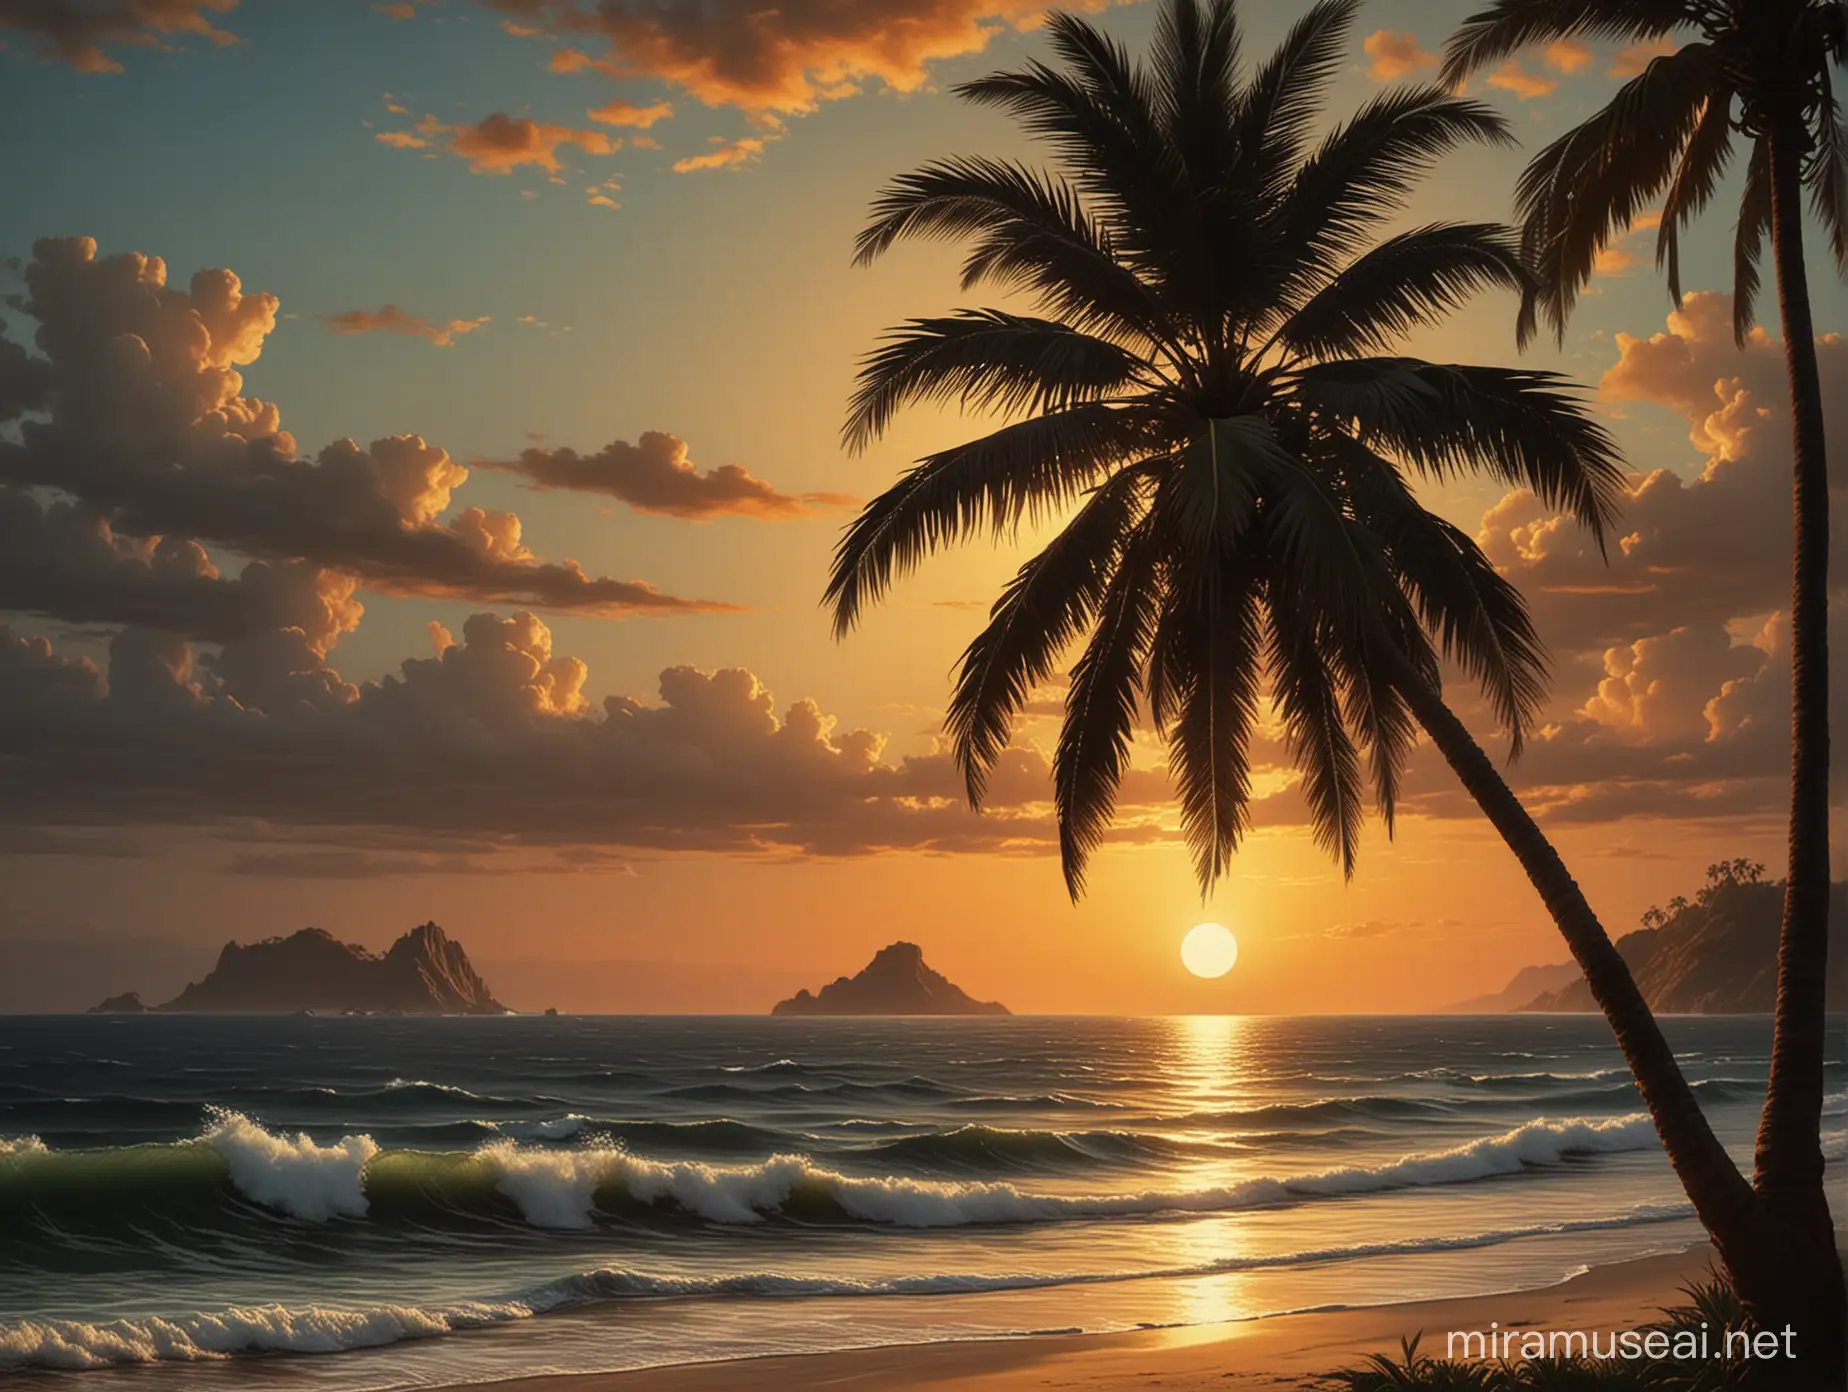 Tranquil Sunset on a Pacific Island CaravaggioInspired Seascape with Palm Tree